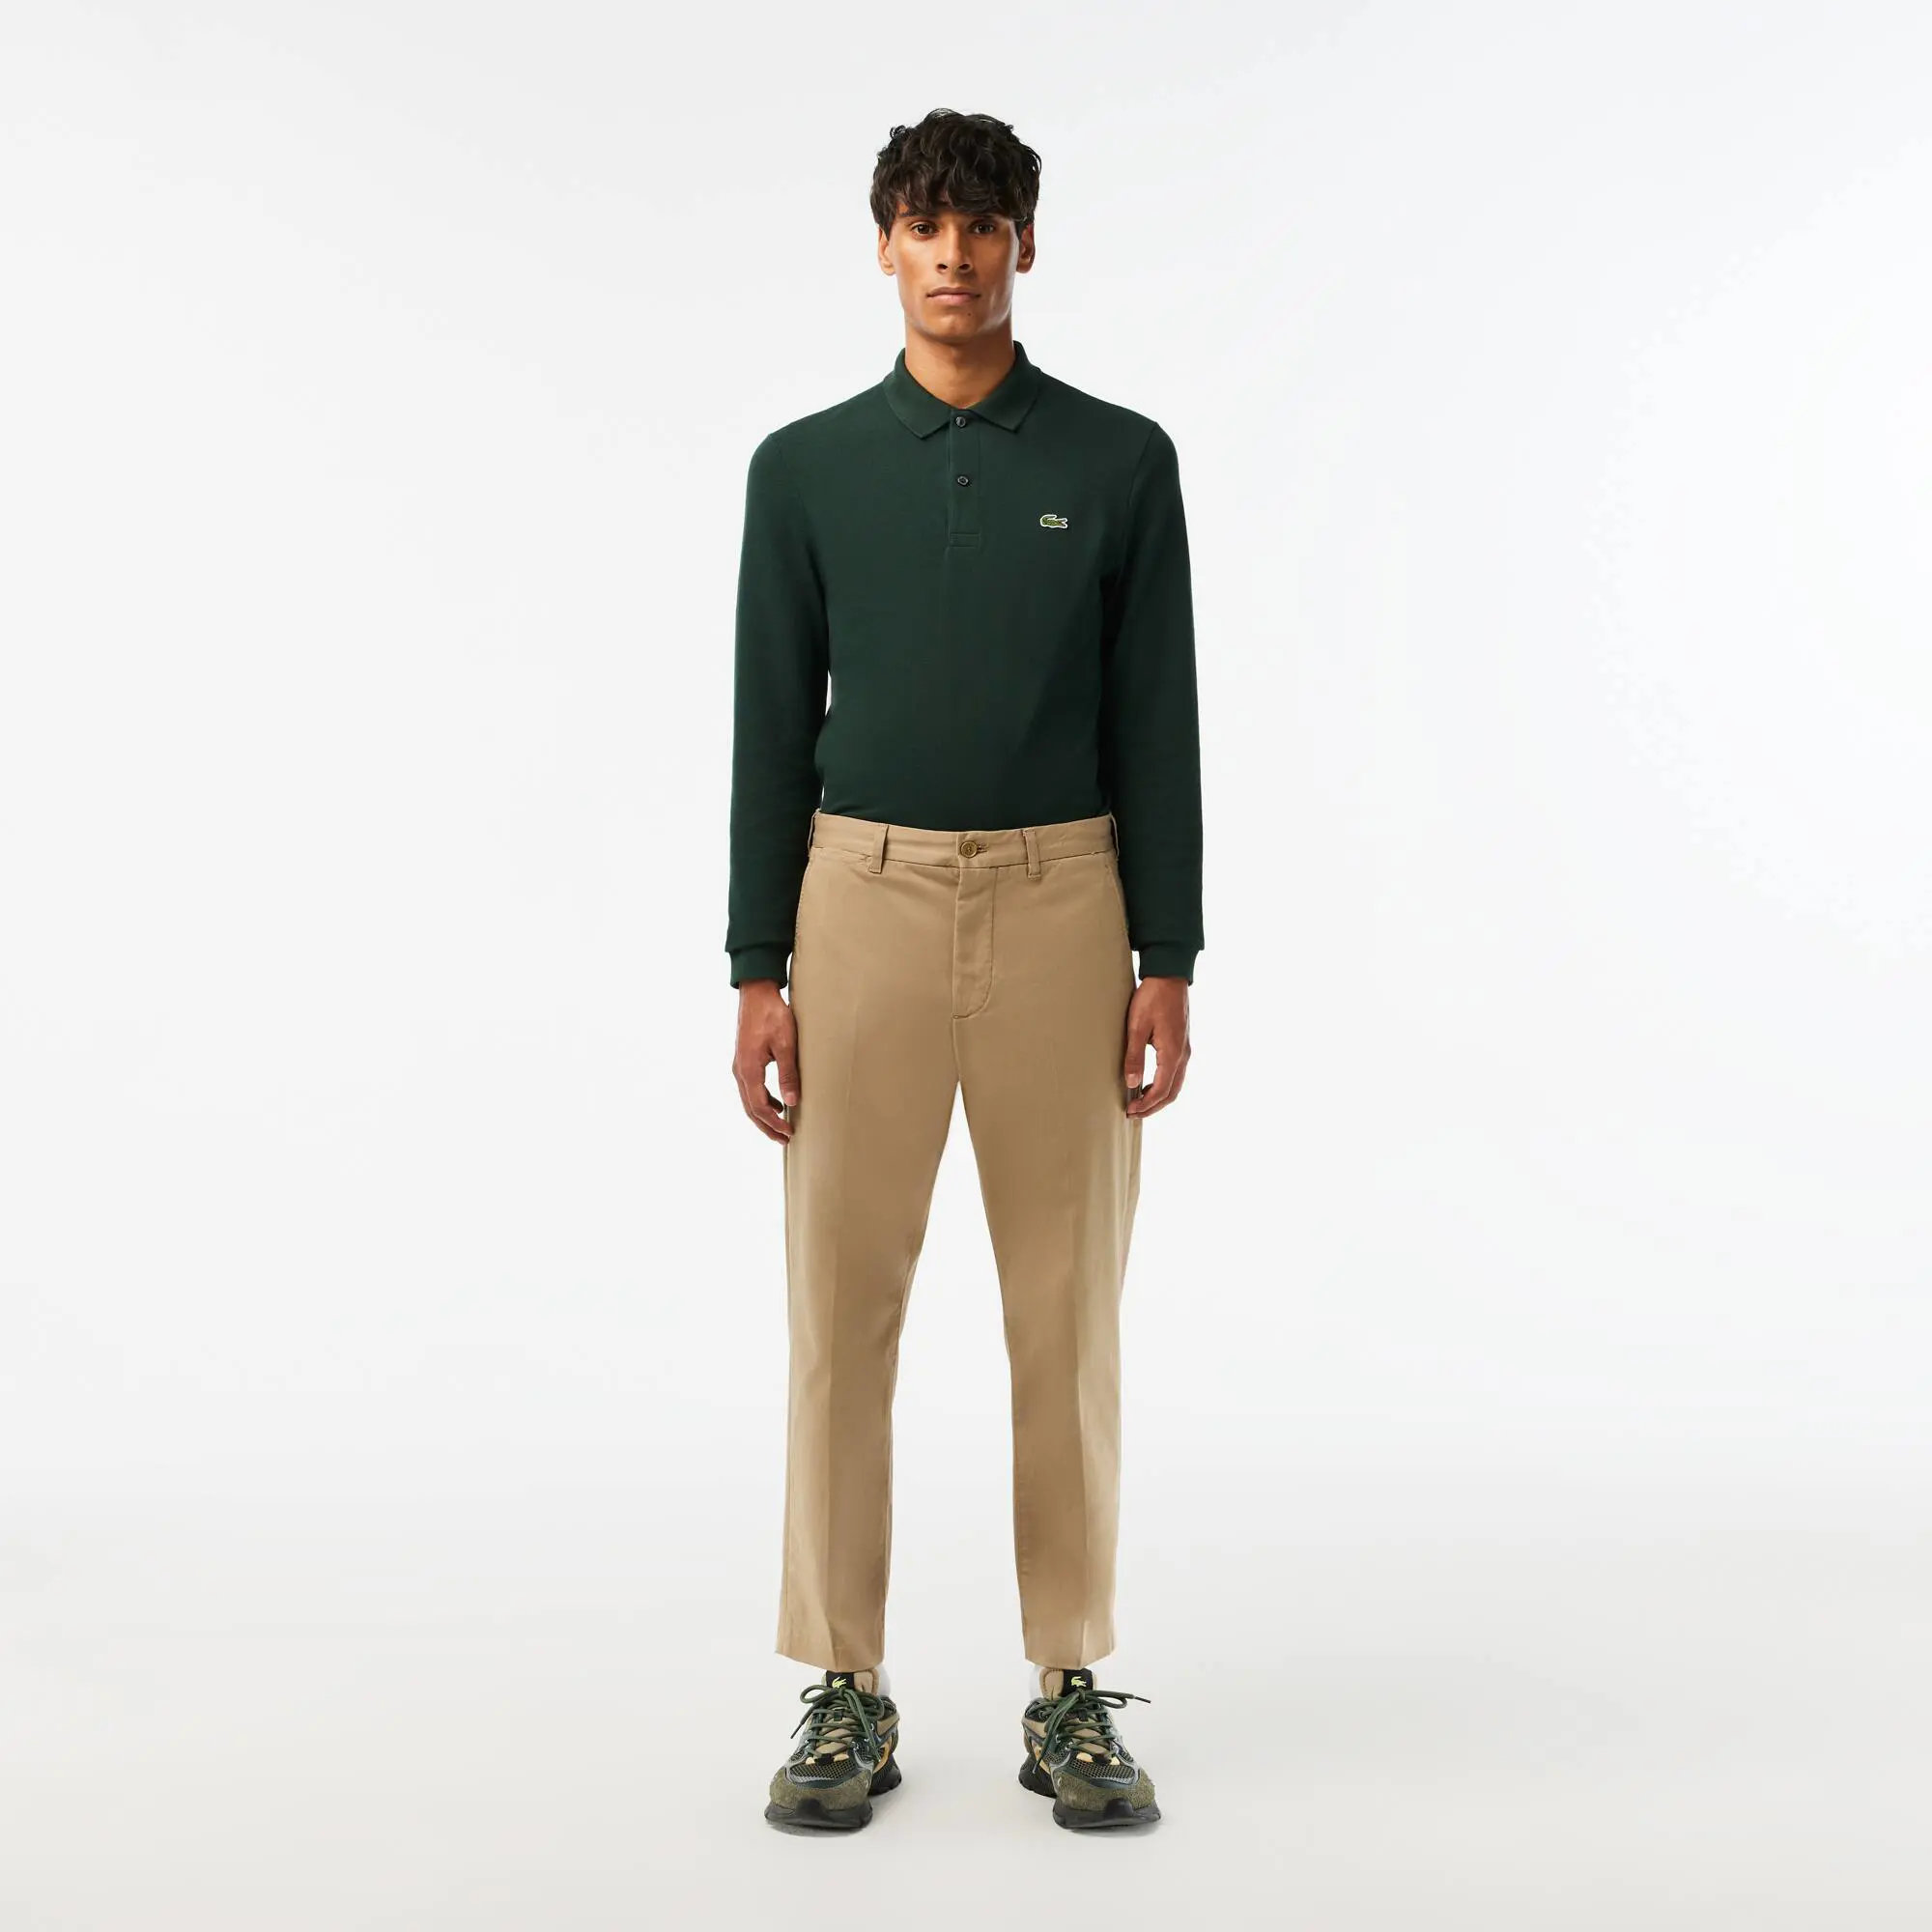 Lacoste Men's Stretch Cotton Tapered Chinos. 1